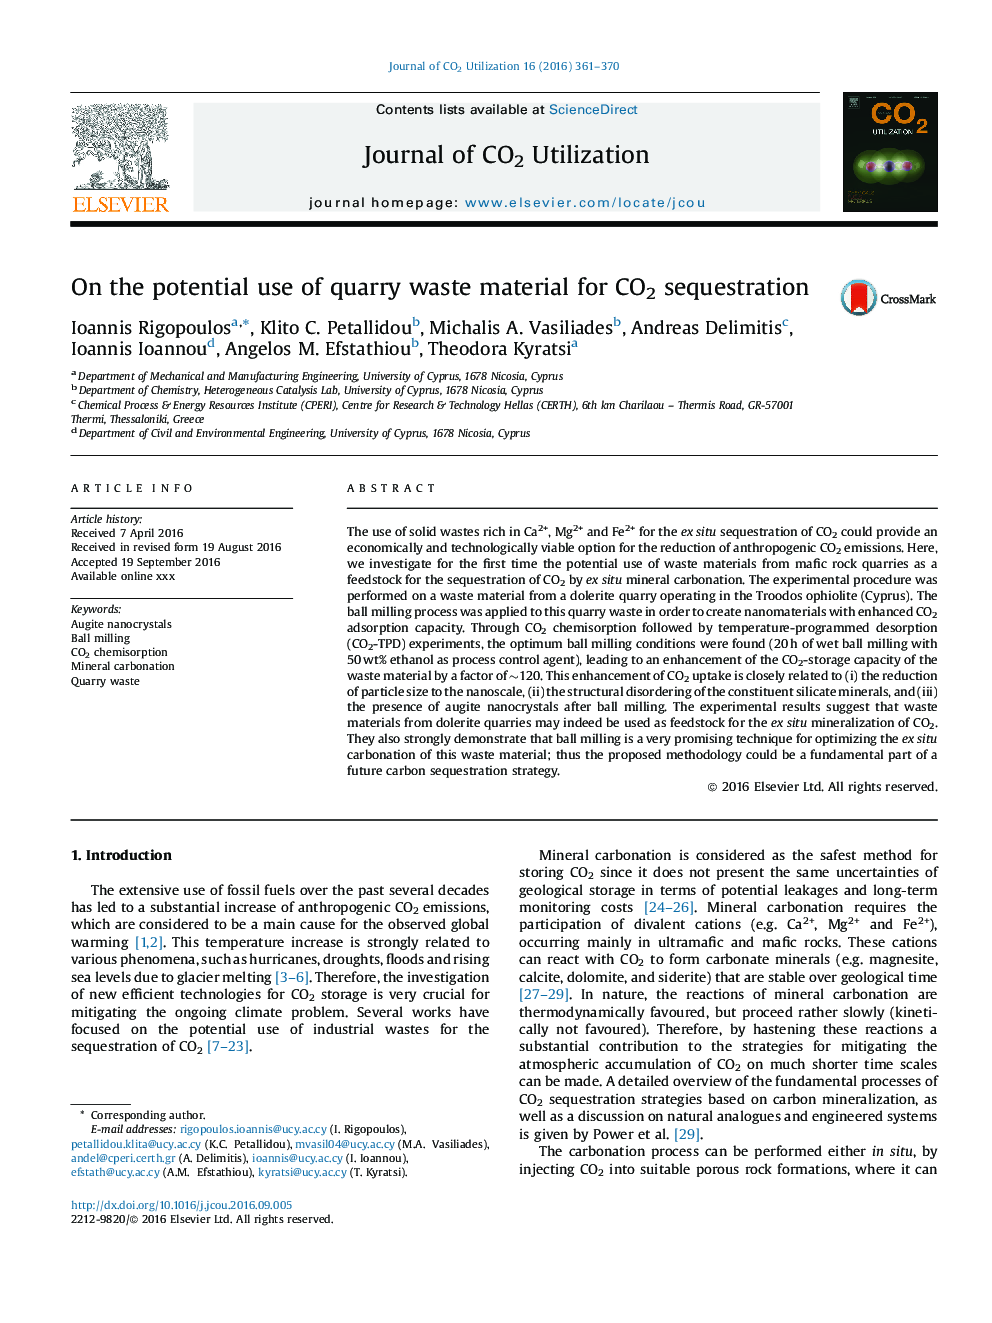 On the potential use of quarry waste material for CO2 sequestration